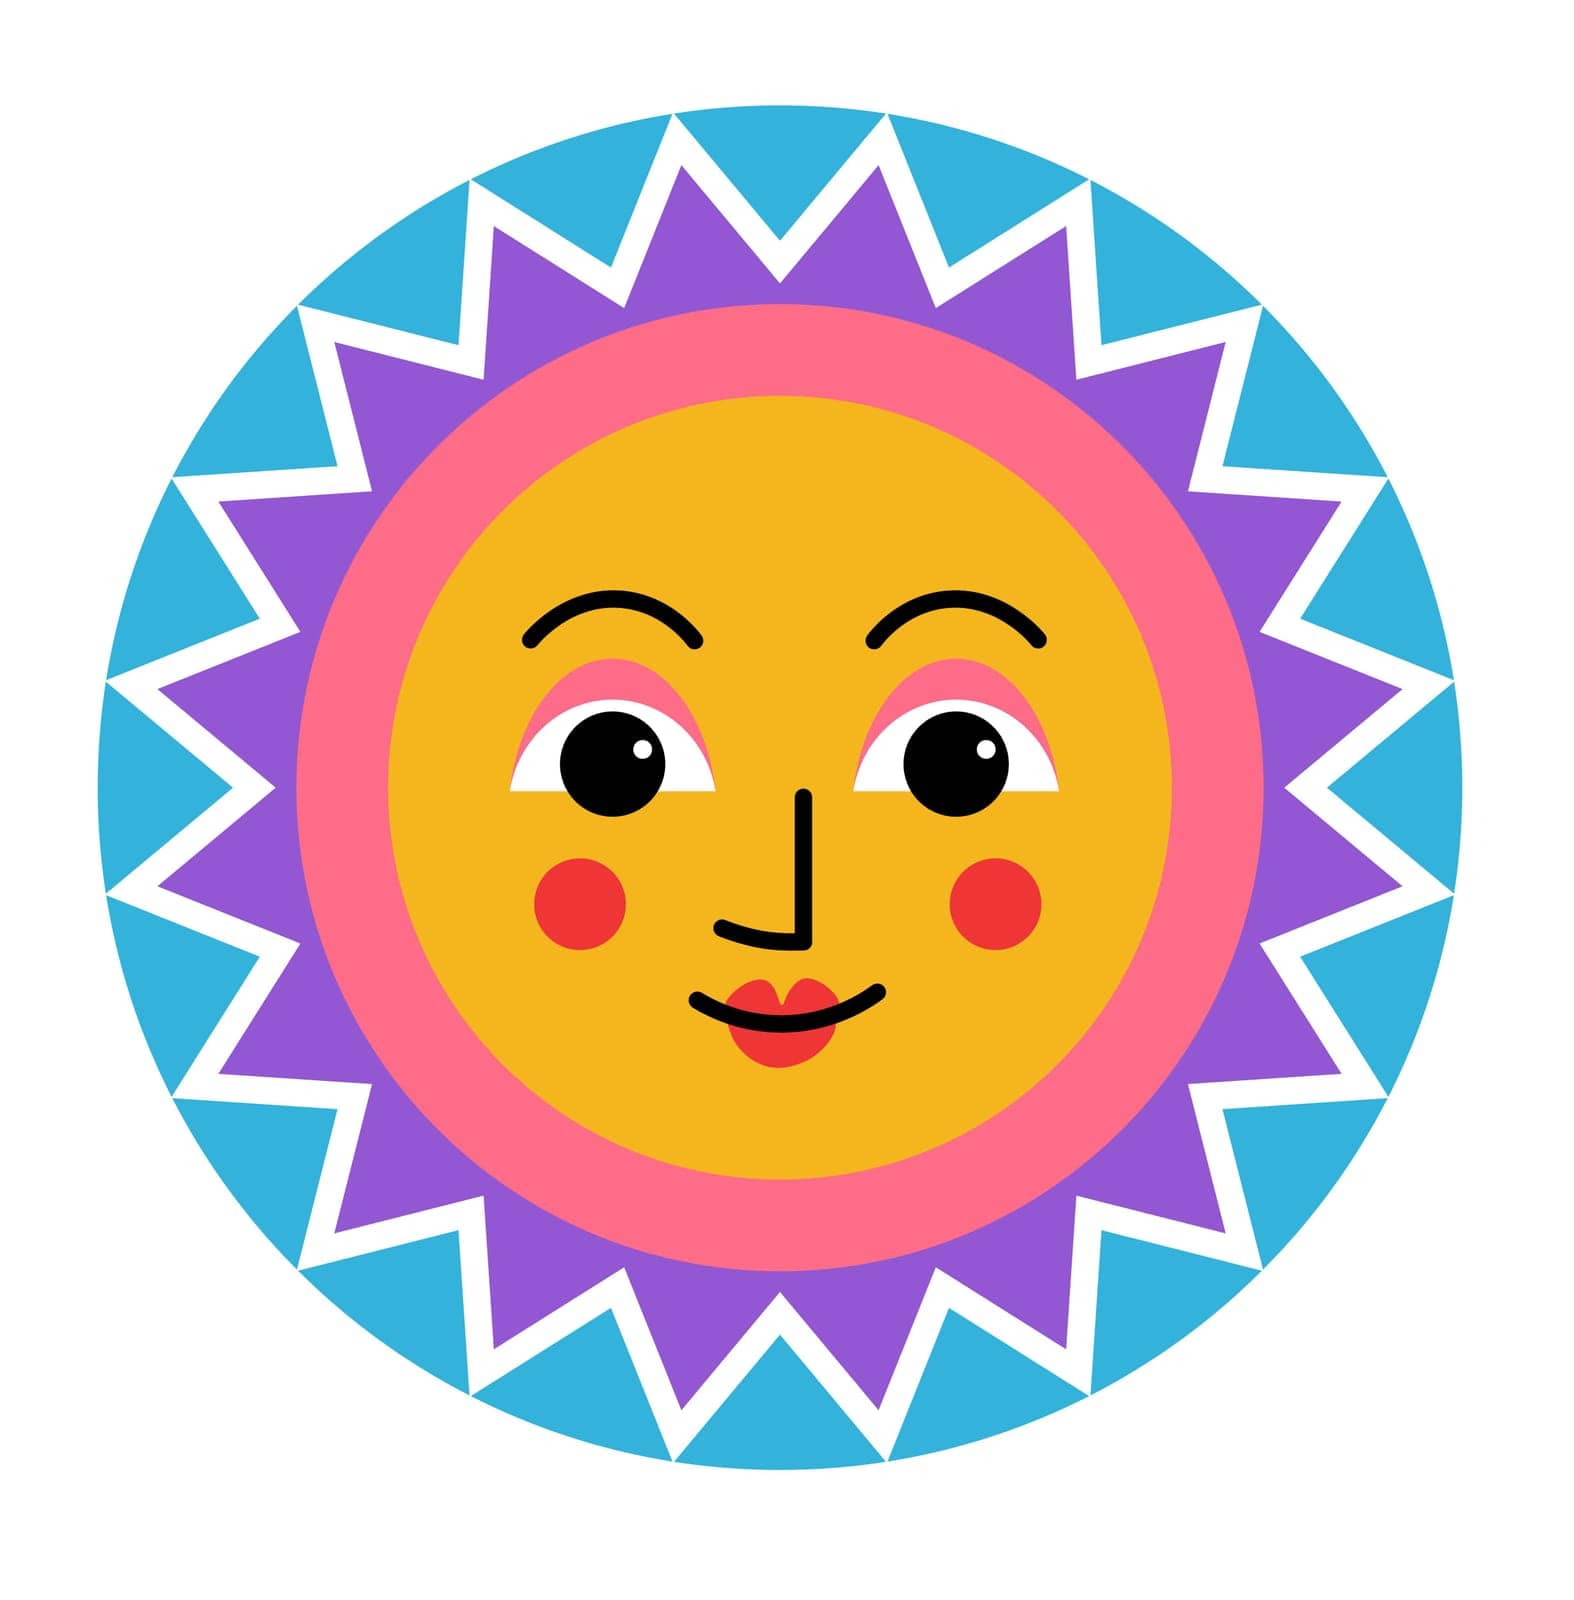 Sun character with rays and smile on face, emoji by Sonulkaster